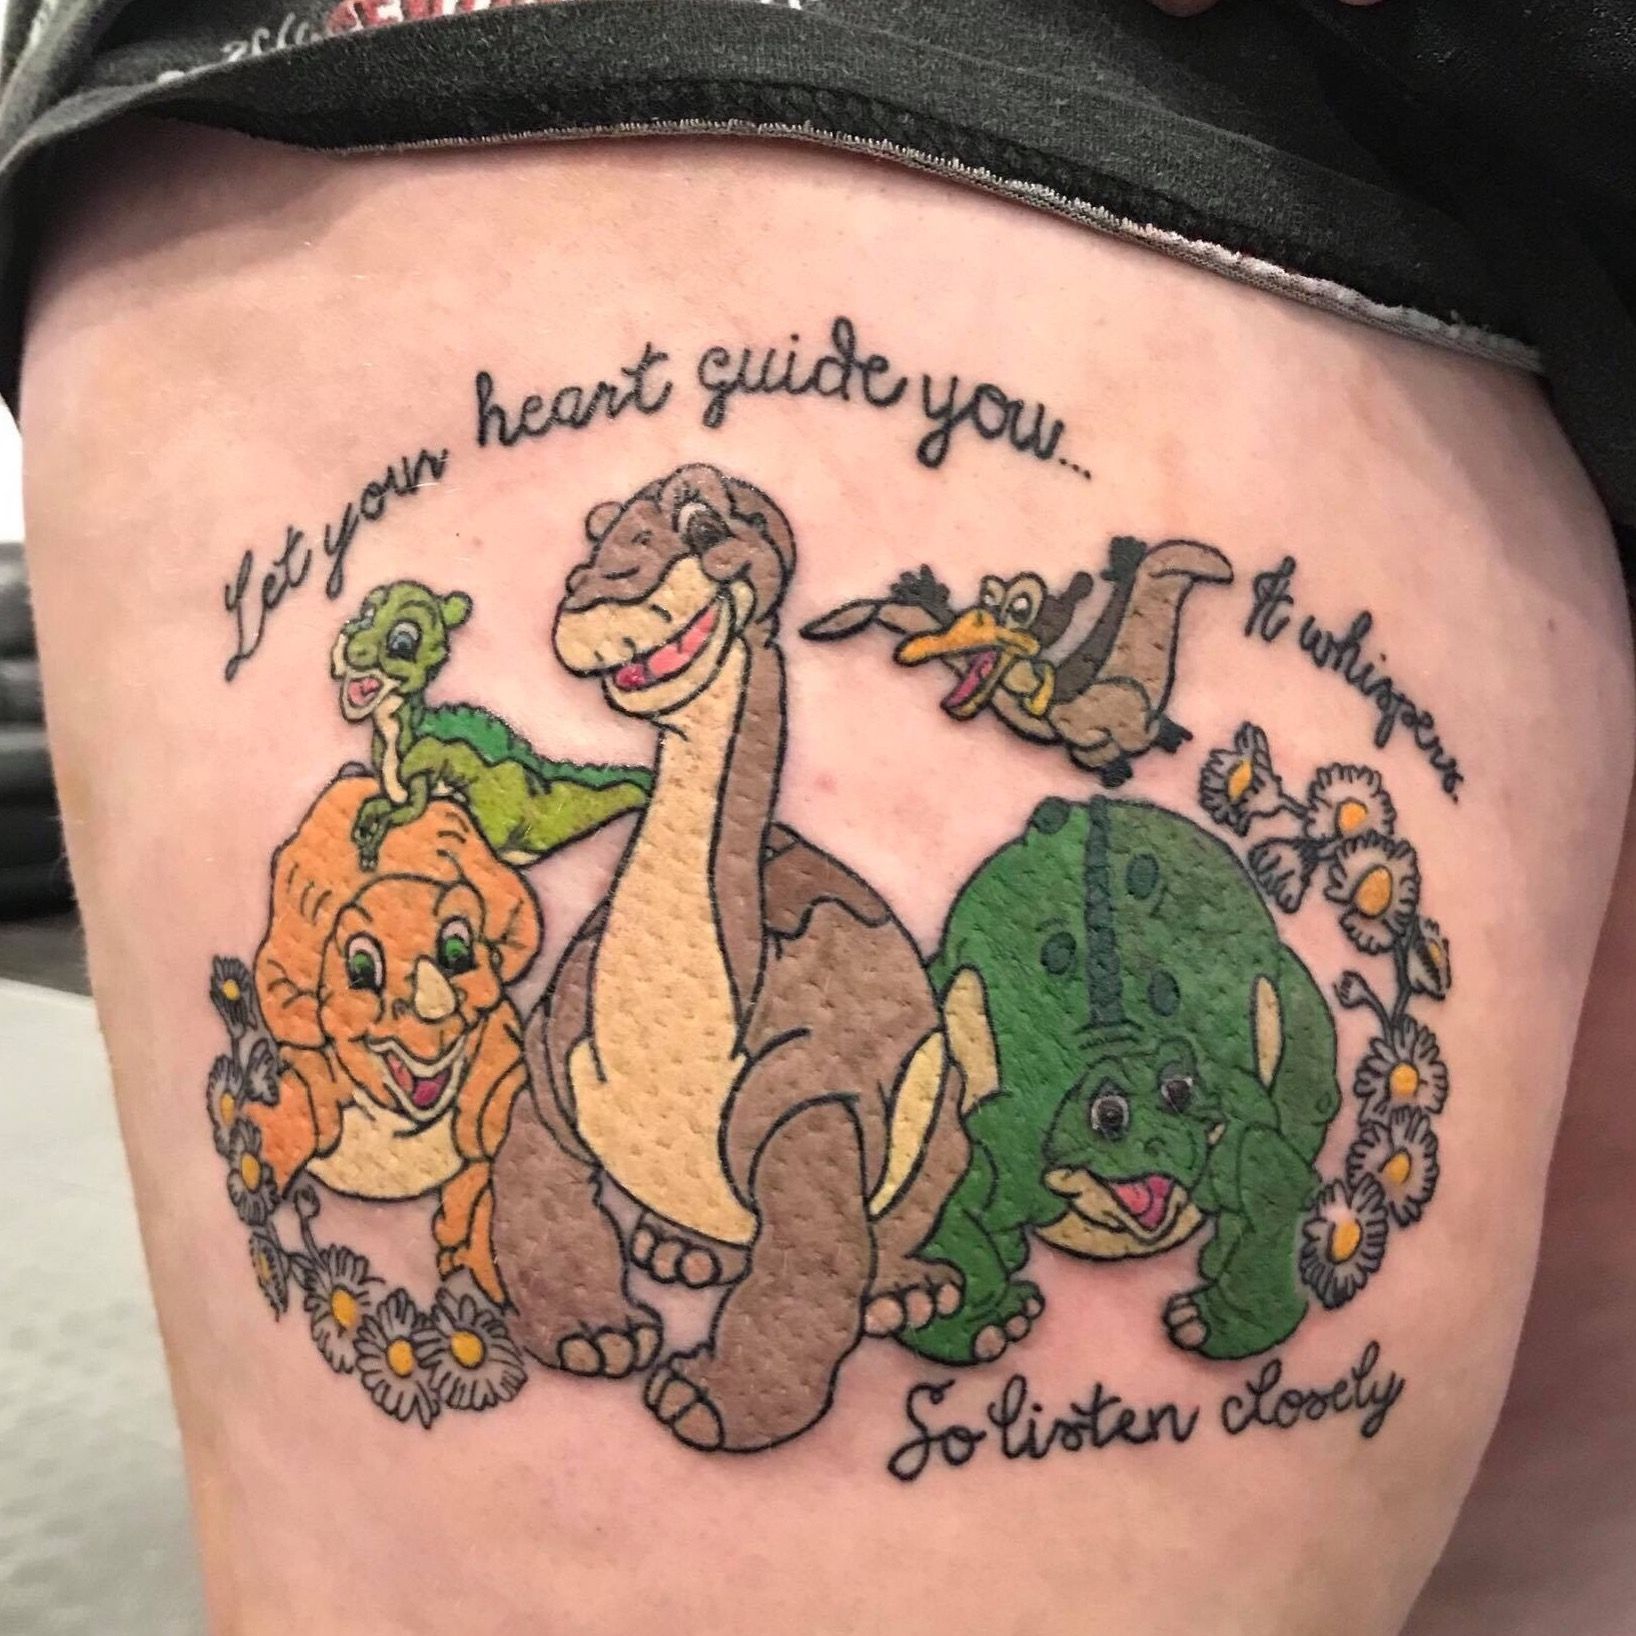 Hannah Mai Tattoo  Land before time Ducky  Little foot Been so excited  to tattoo this Fun one to start of my guest spot with the talented lot at  boldasbrasstattoo in